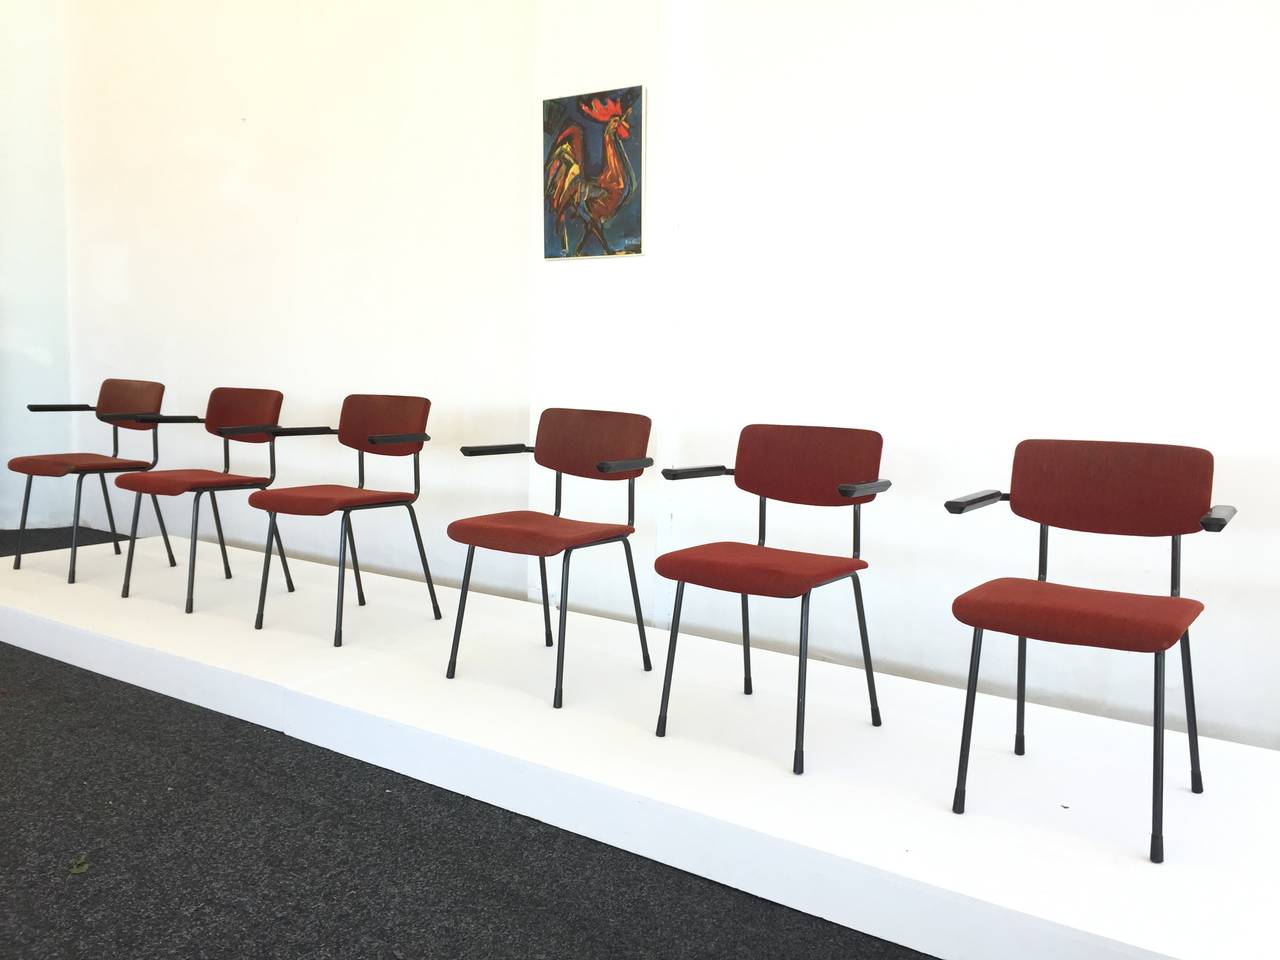 Big Lot Gispen 1236 Armchairs Produced in 1960 for a Dutch University 1